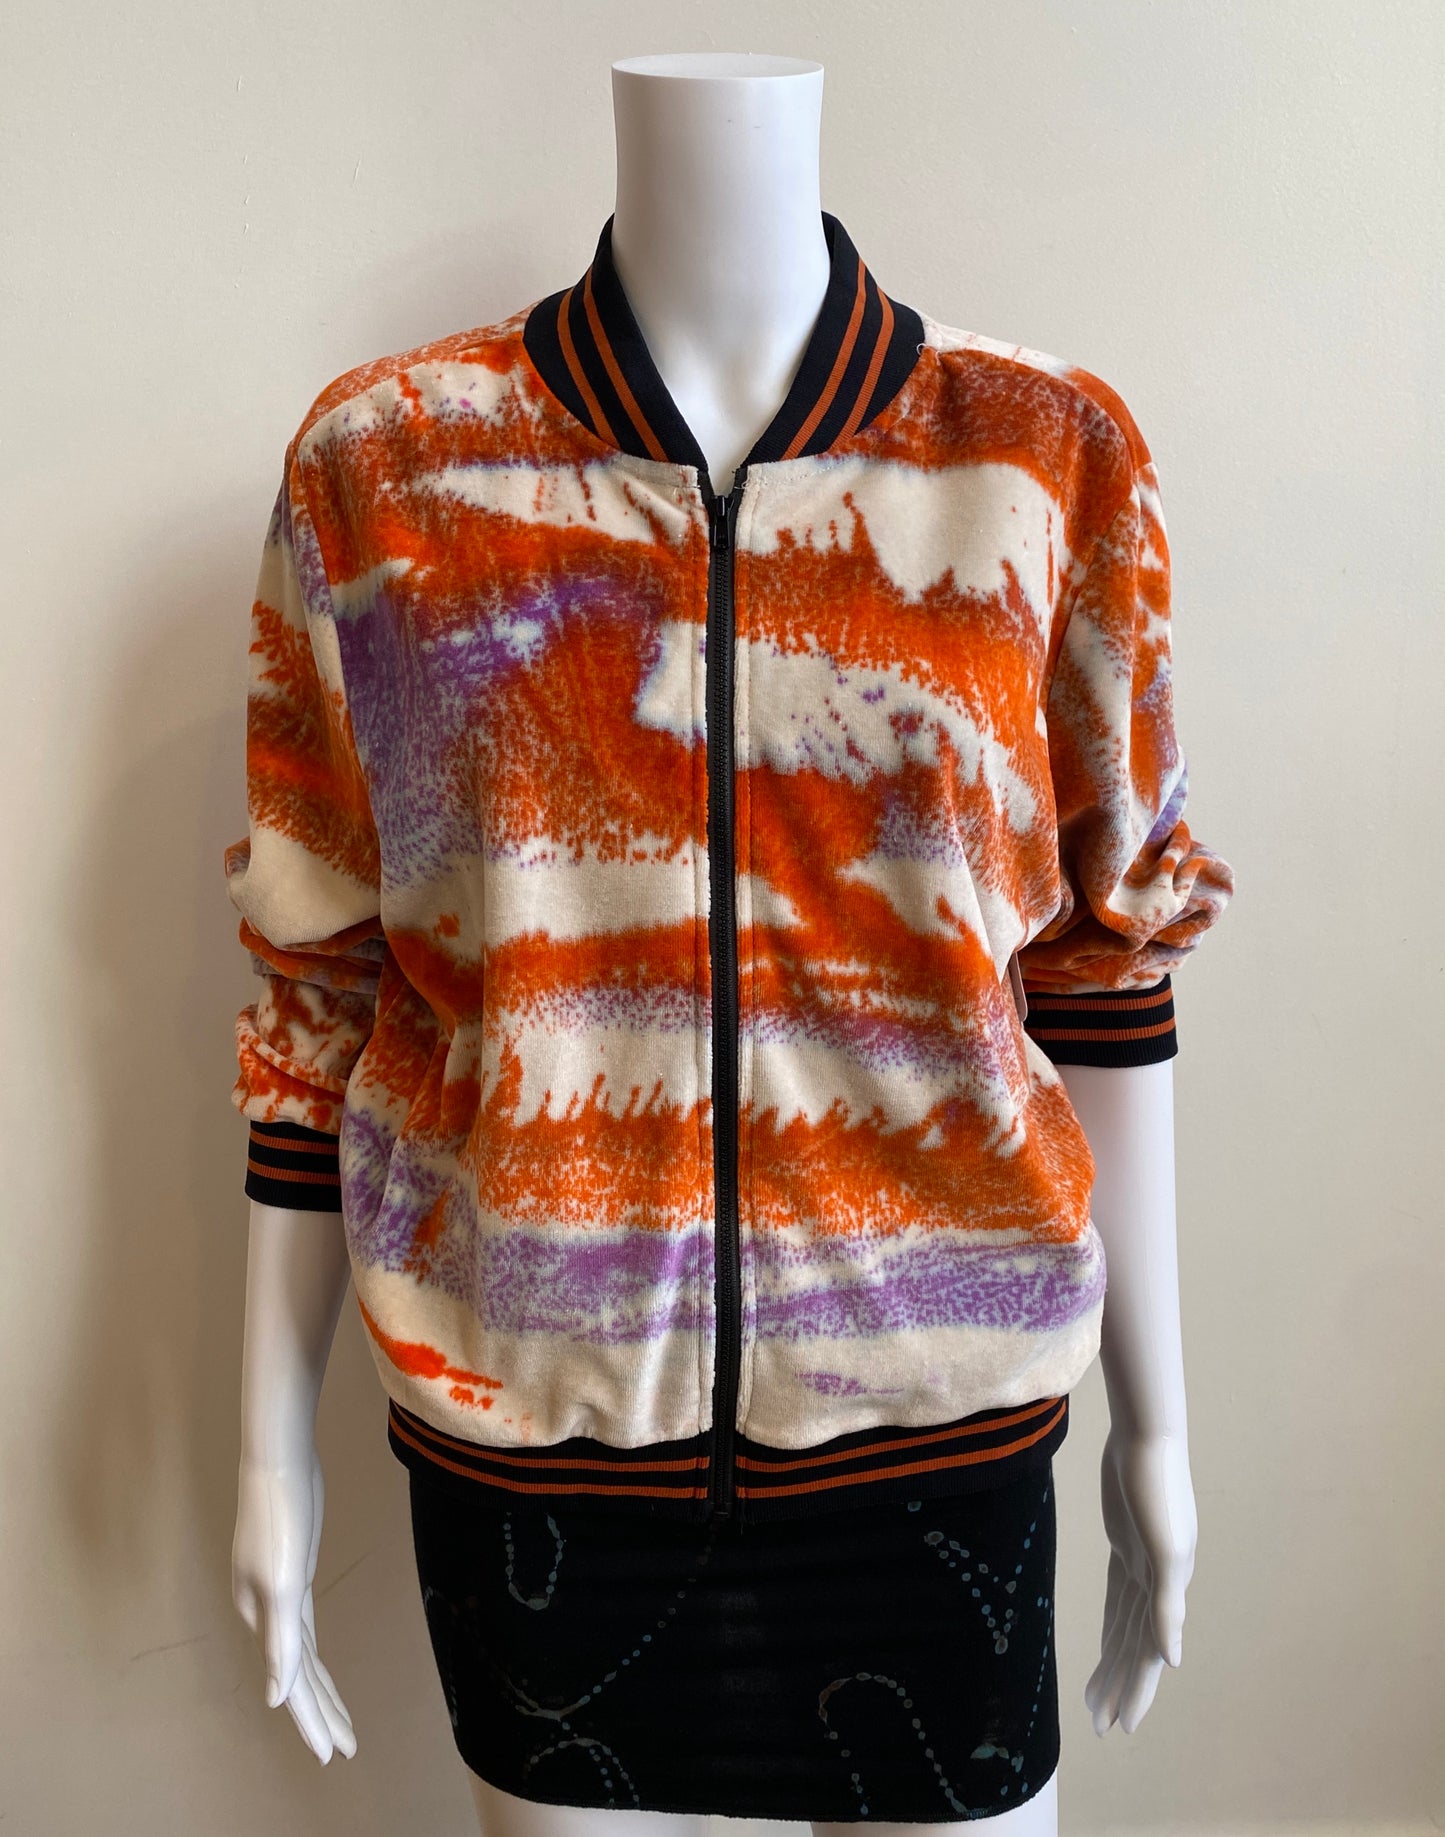 Velour Bomber Jacket in Orange Speckled Trout with side seam pockets